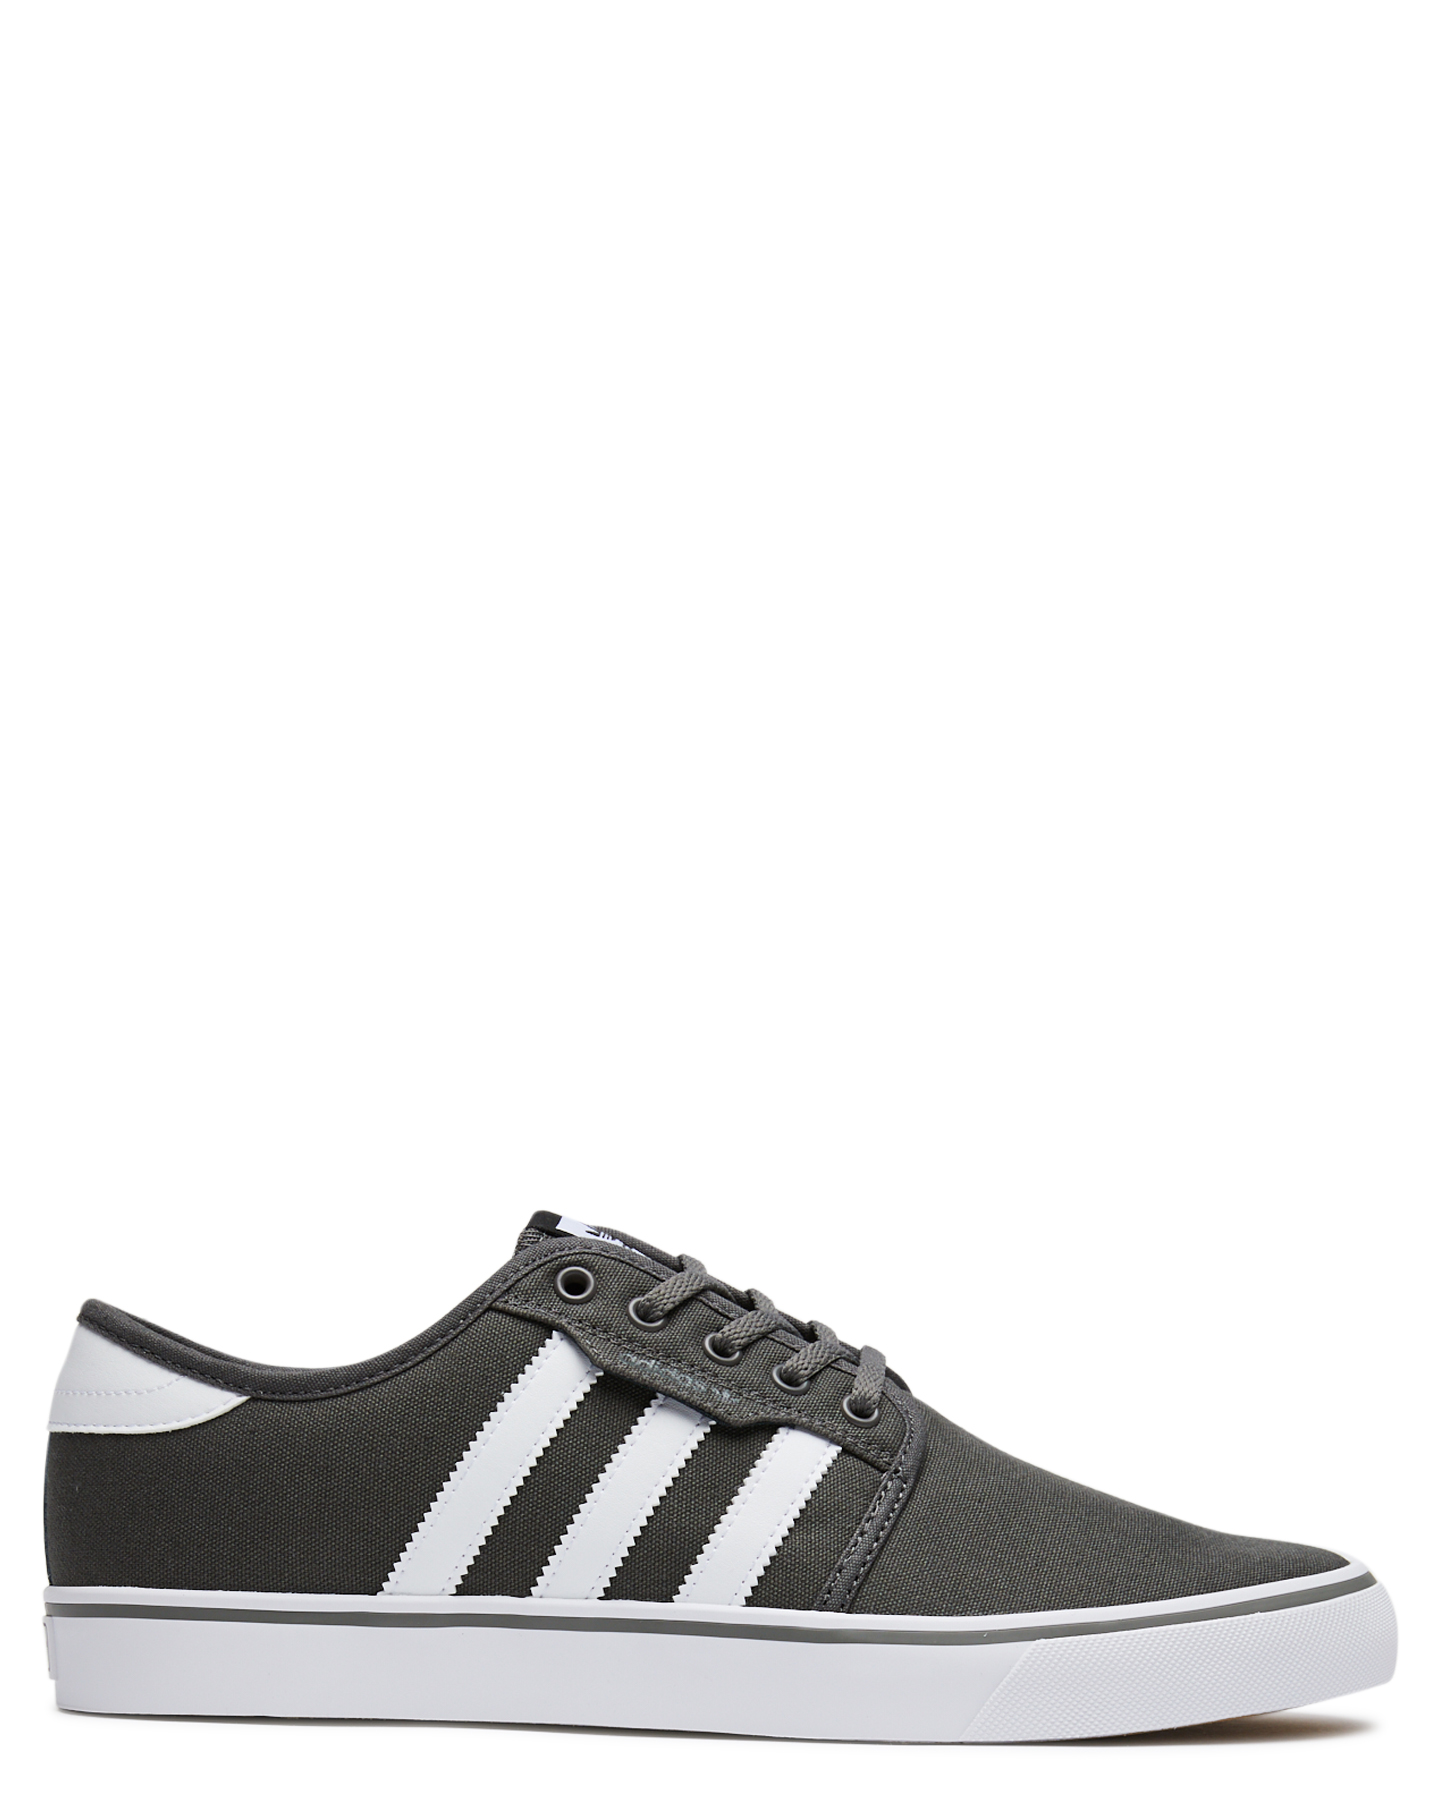 adidas womens seeley shoes